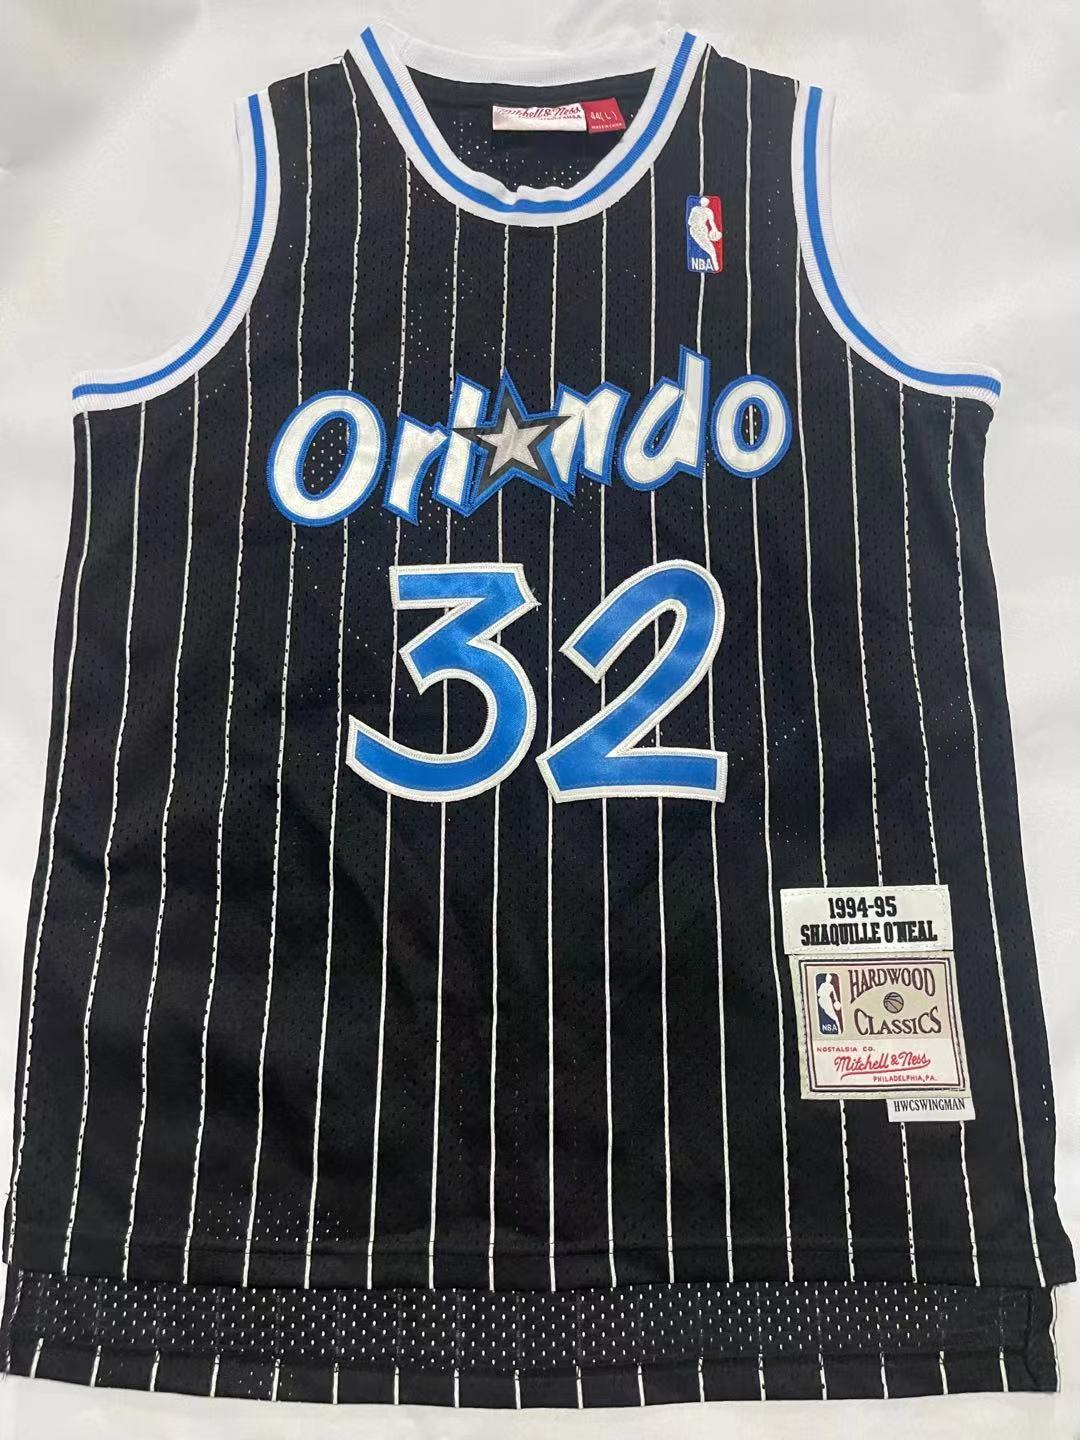 Shaquille O'Neal Magic Jersey